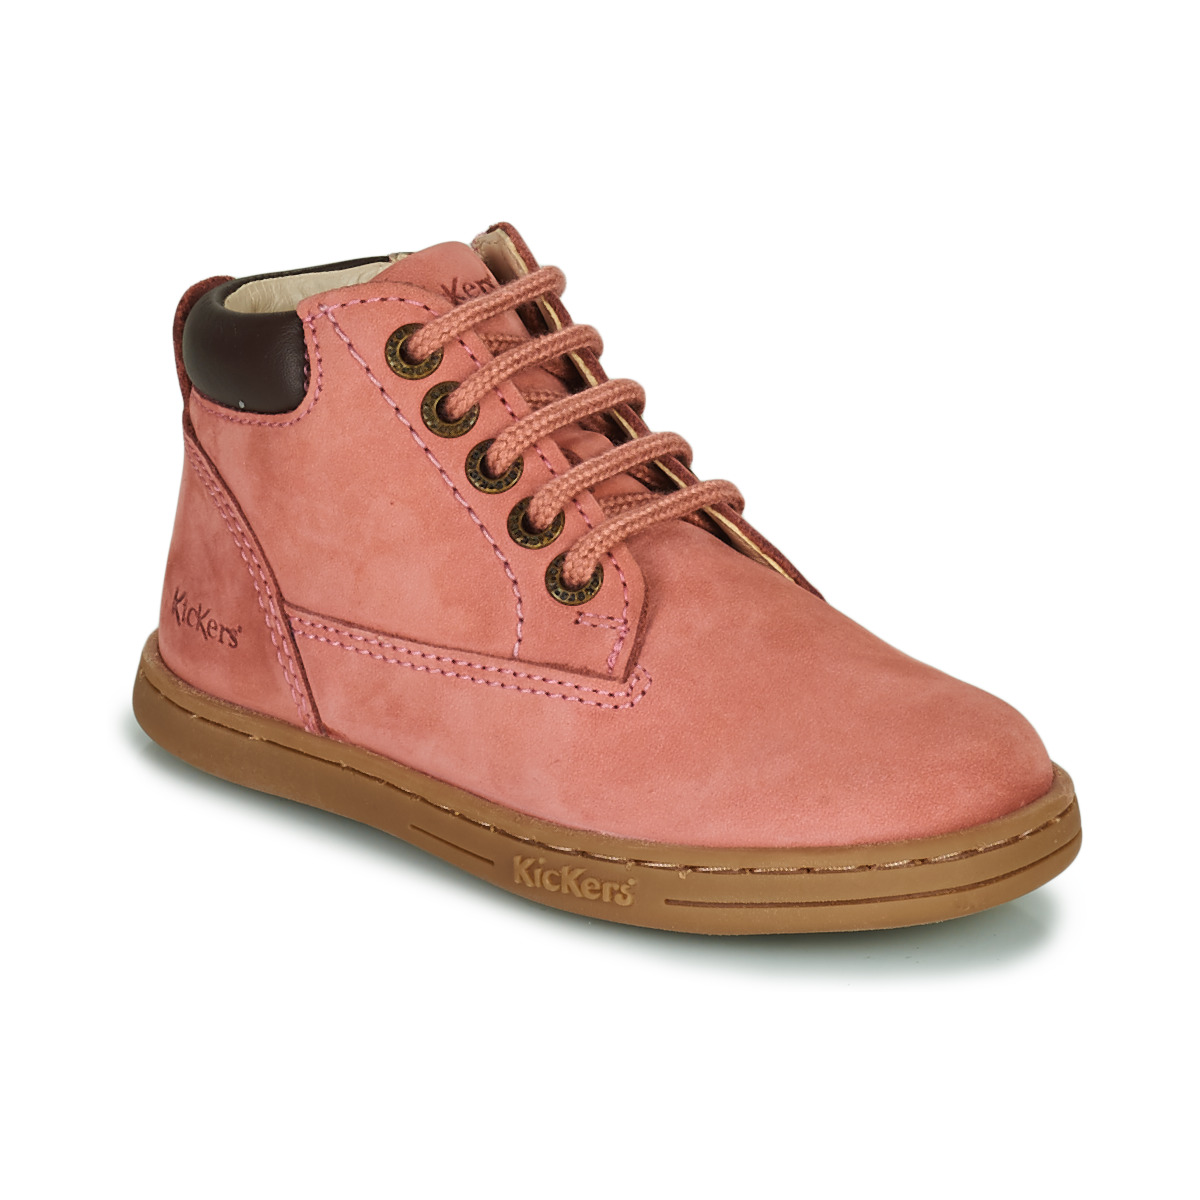 Chaussures Fille Boots Kickers TACKLAND Rose